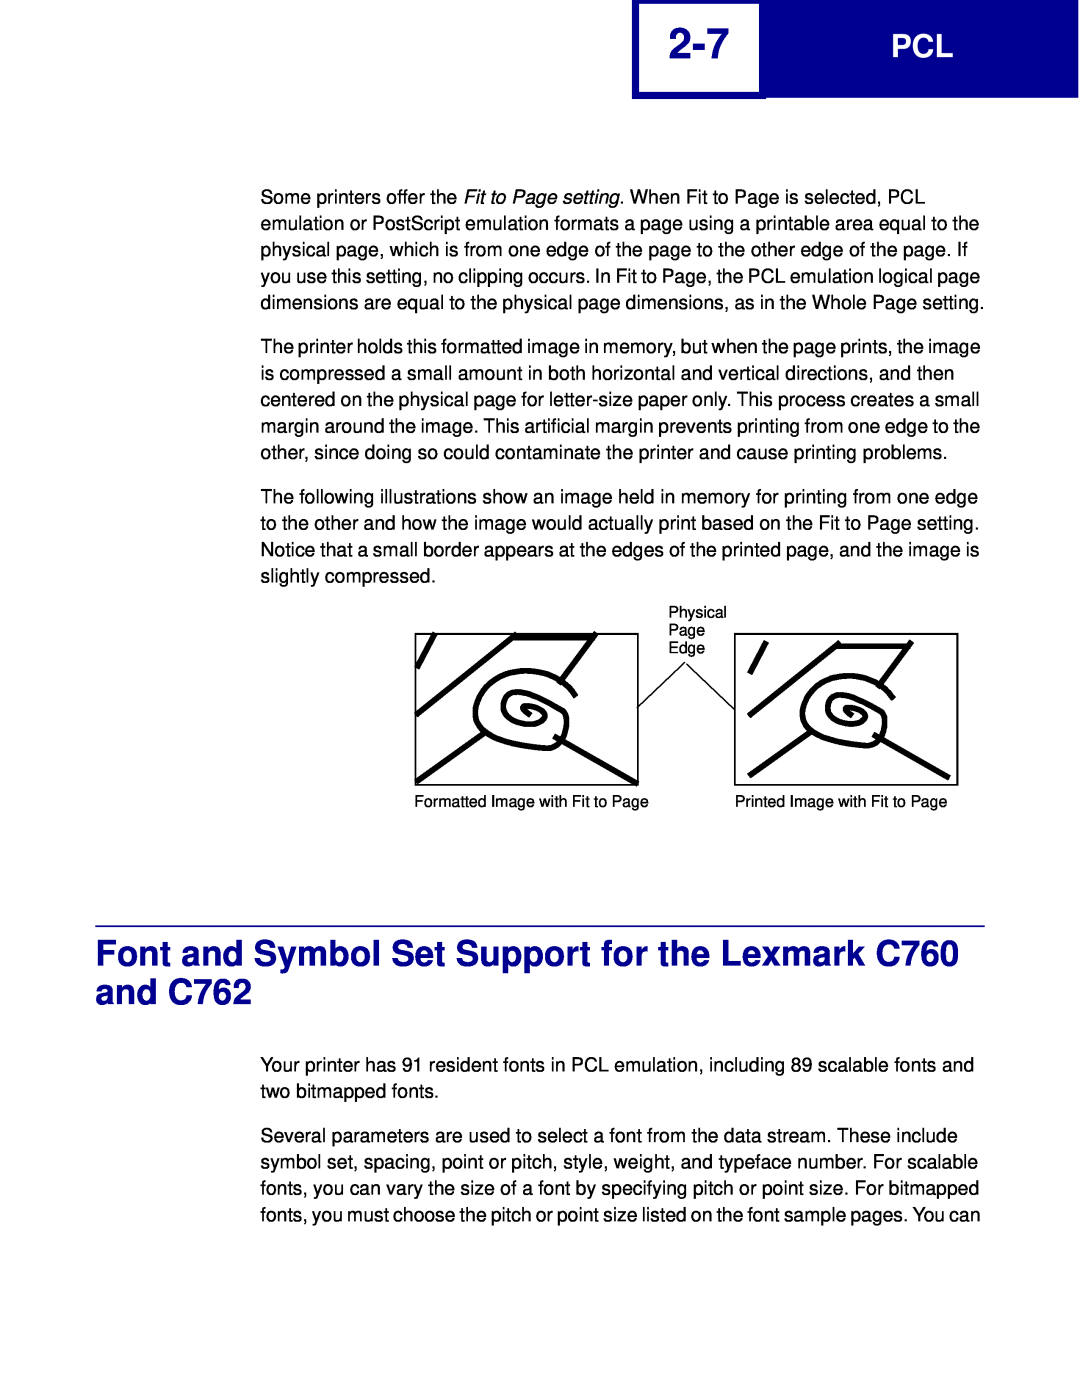 Lexmark manual Font and Symbol Set Support for the Lexmark C760 and C762, Edge, Formatted Image with Fit to Page 